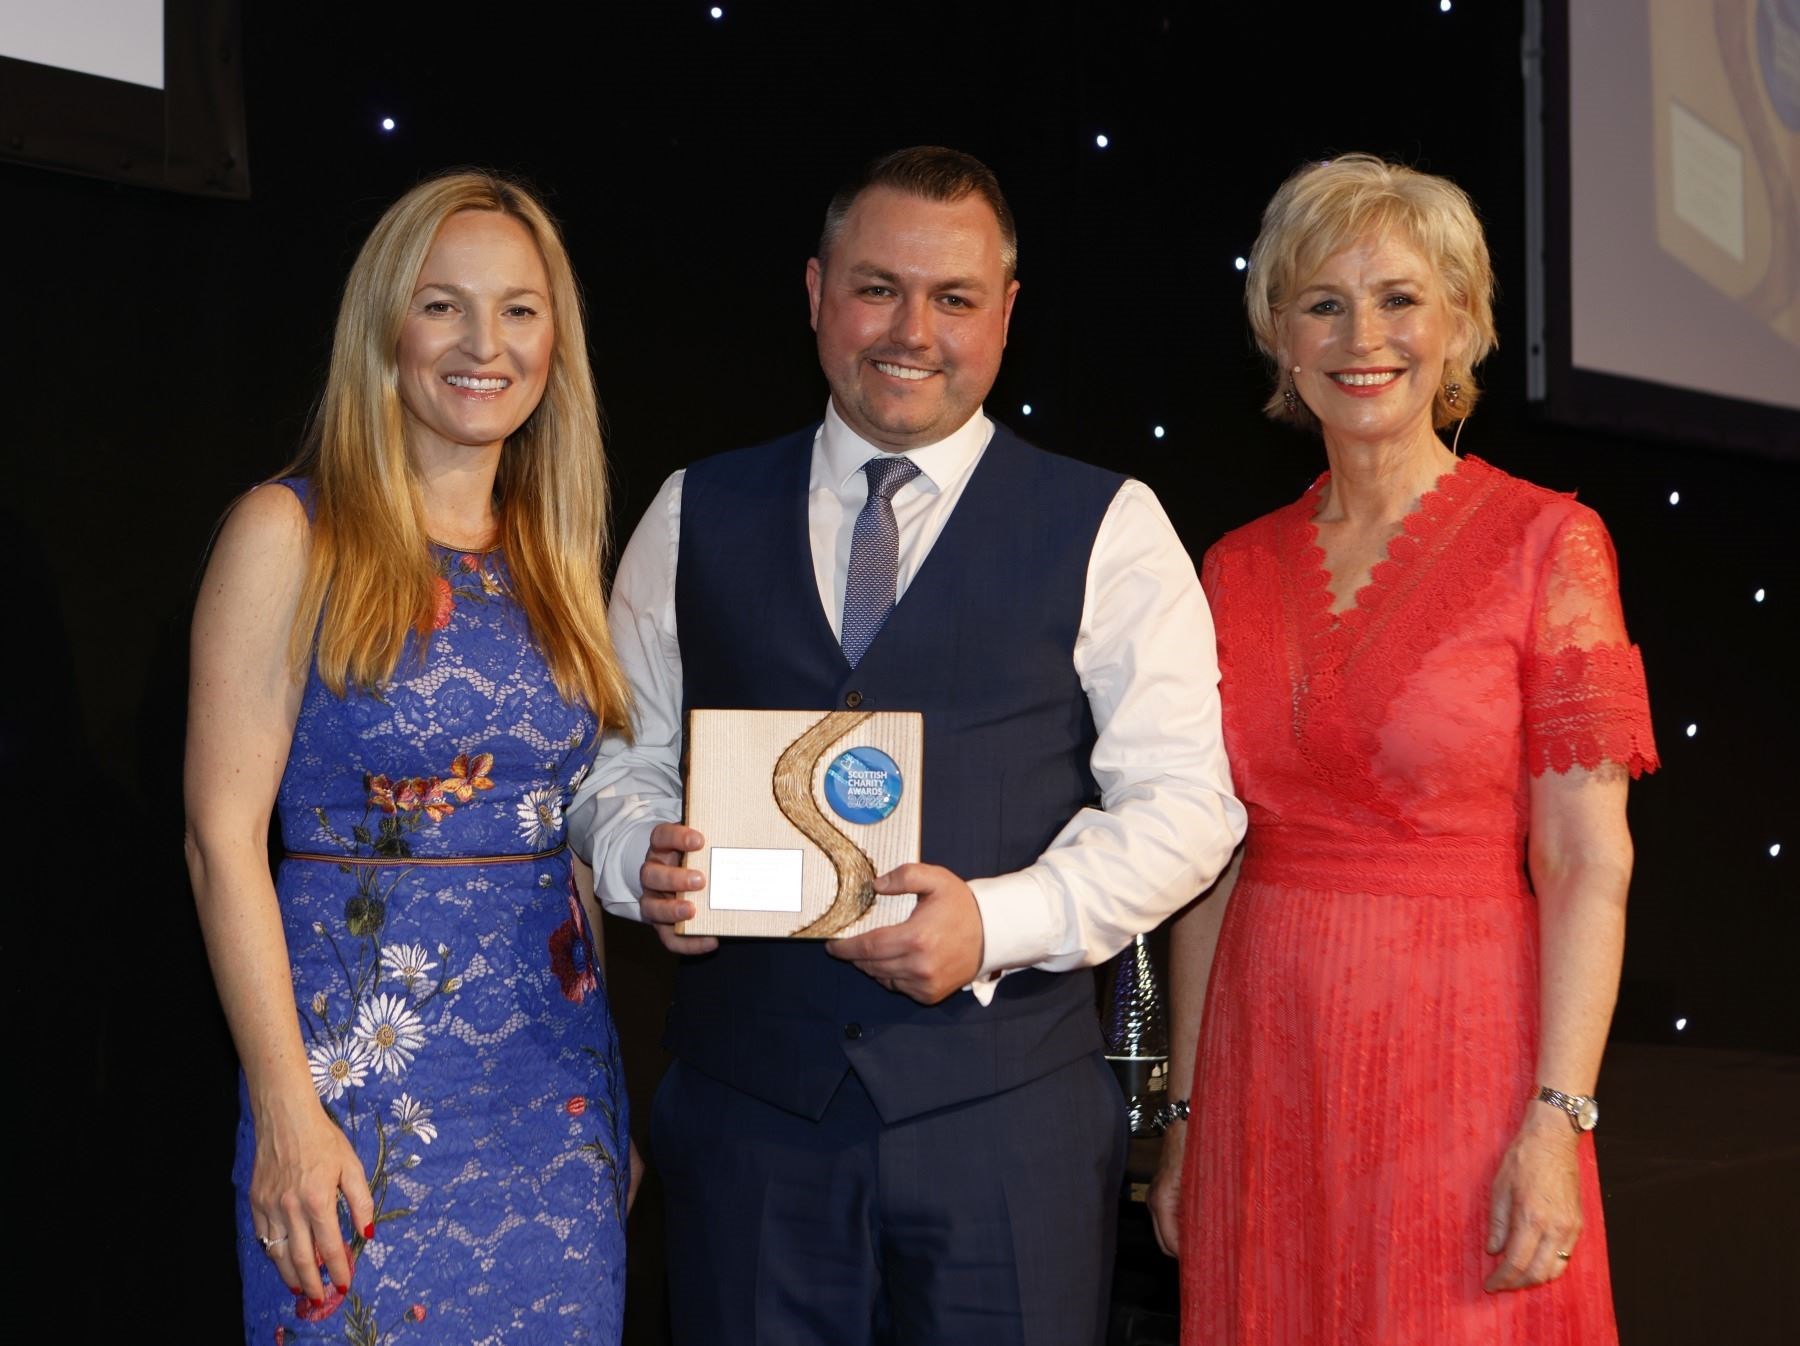 From left, June Pennykid, from Keegan & Pennykid, Charity of the Year Award sponsor, Declan Harrigan, founder and chief executive of S.M.I.L.E Counselling, Charity of the Year award winner 2022 and Sally Magnusson.